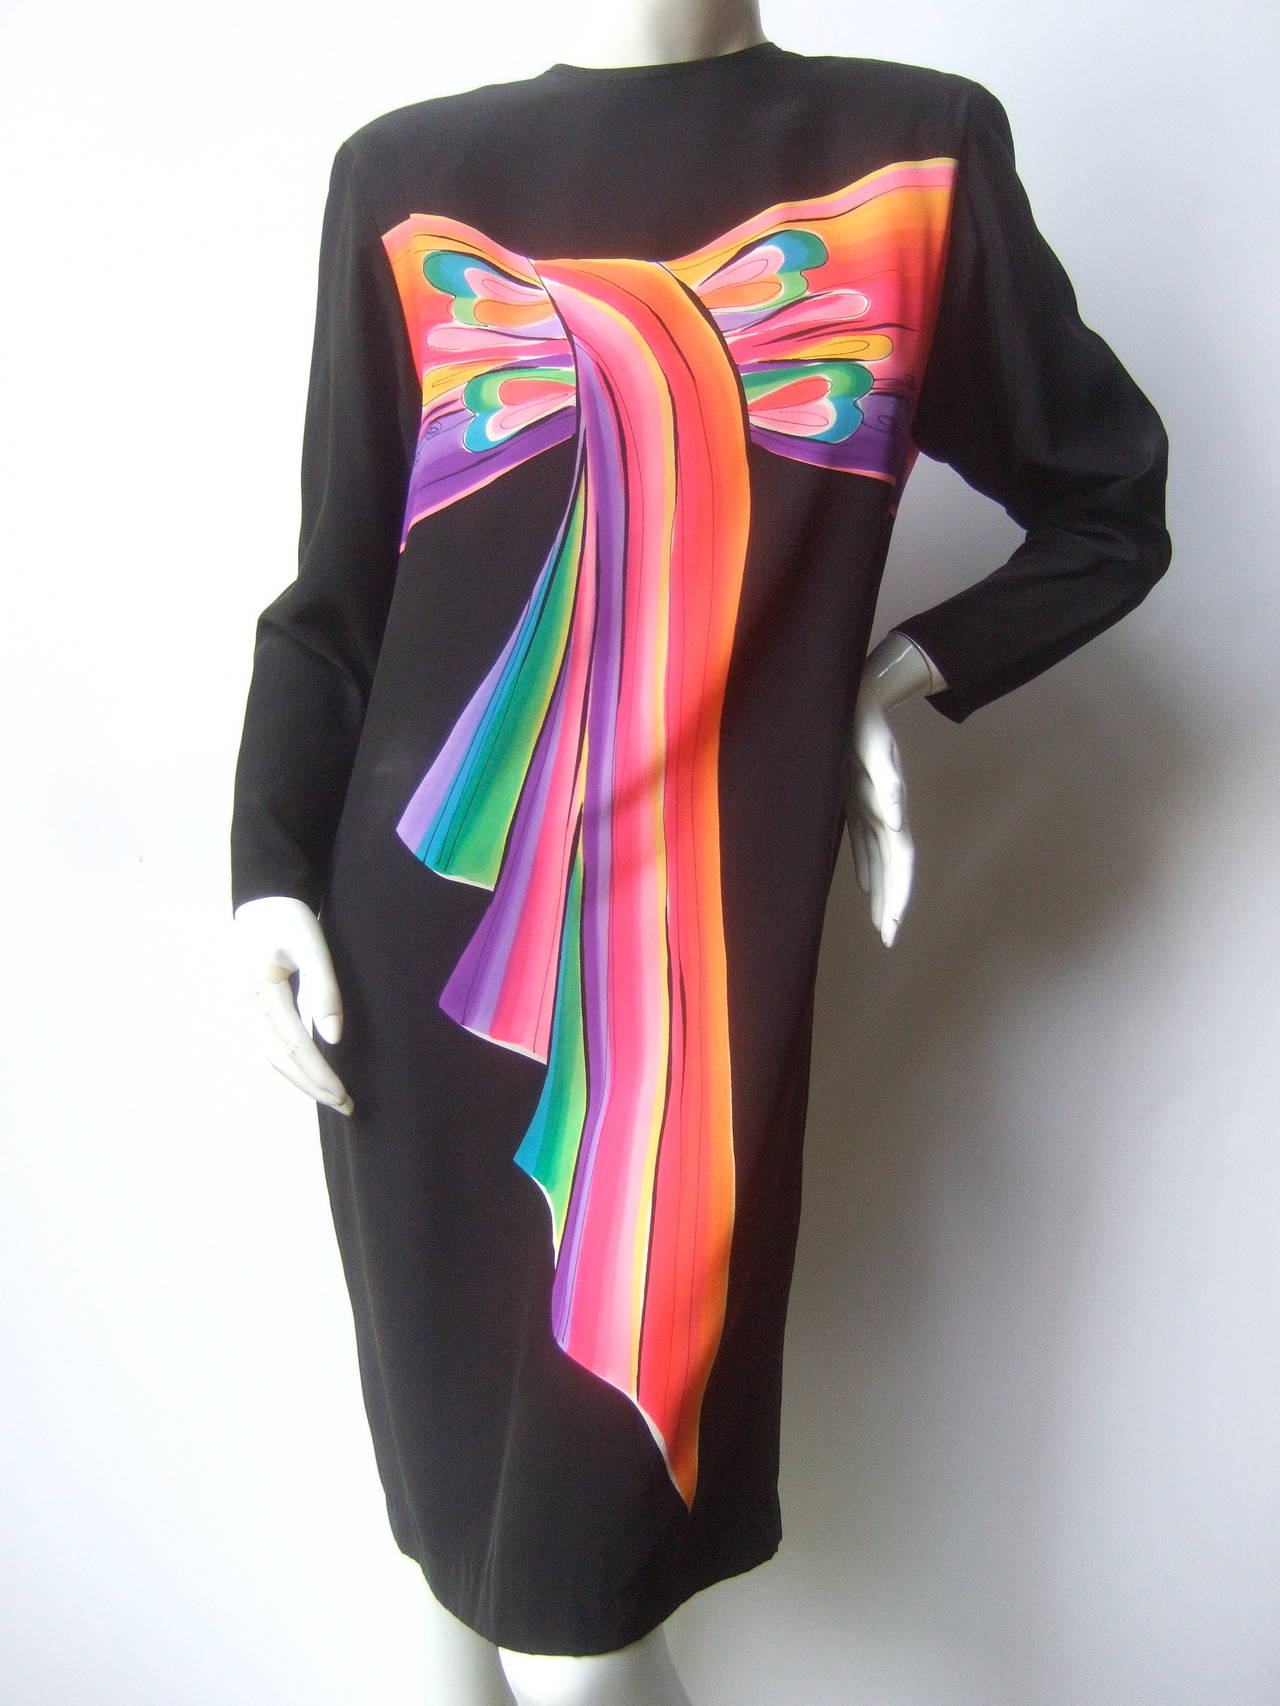 Avant-garde Hand painted black silk color block dress c 1980s
The unique sheath style dress is designed with a vibrant 
hand painted pastel bow detail that runs across the bodice 
extends down the center

The hand painted pastel design also